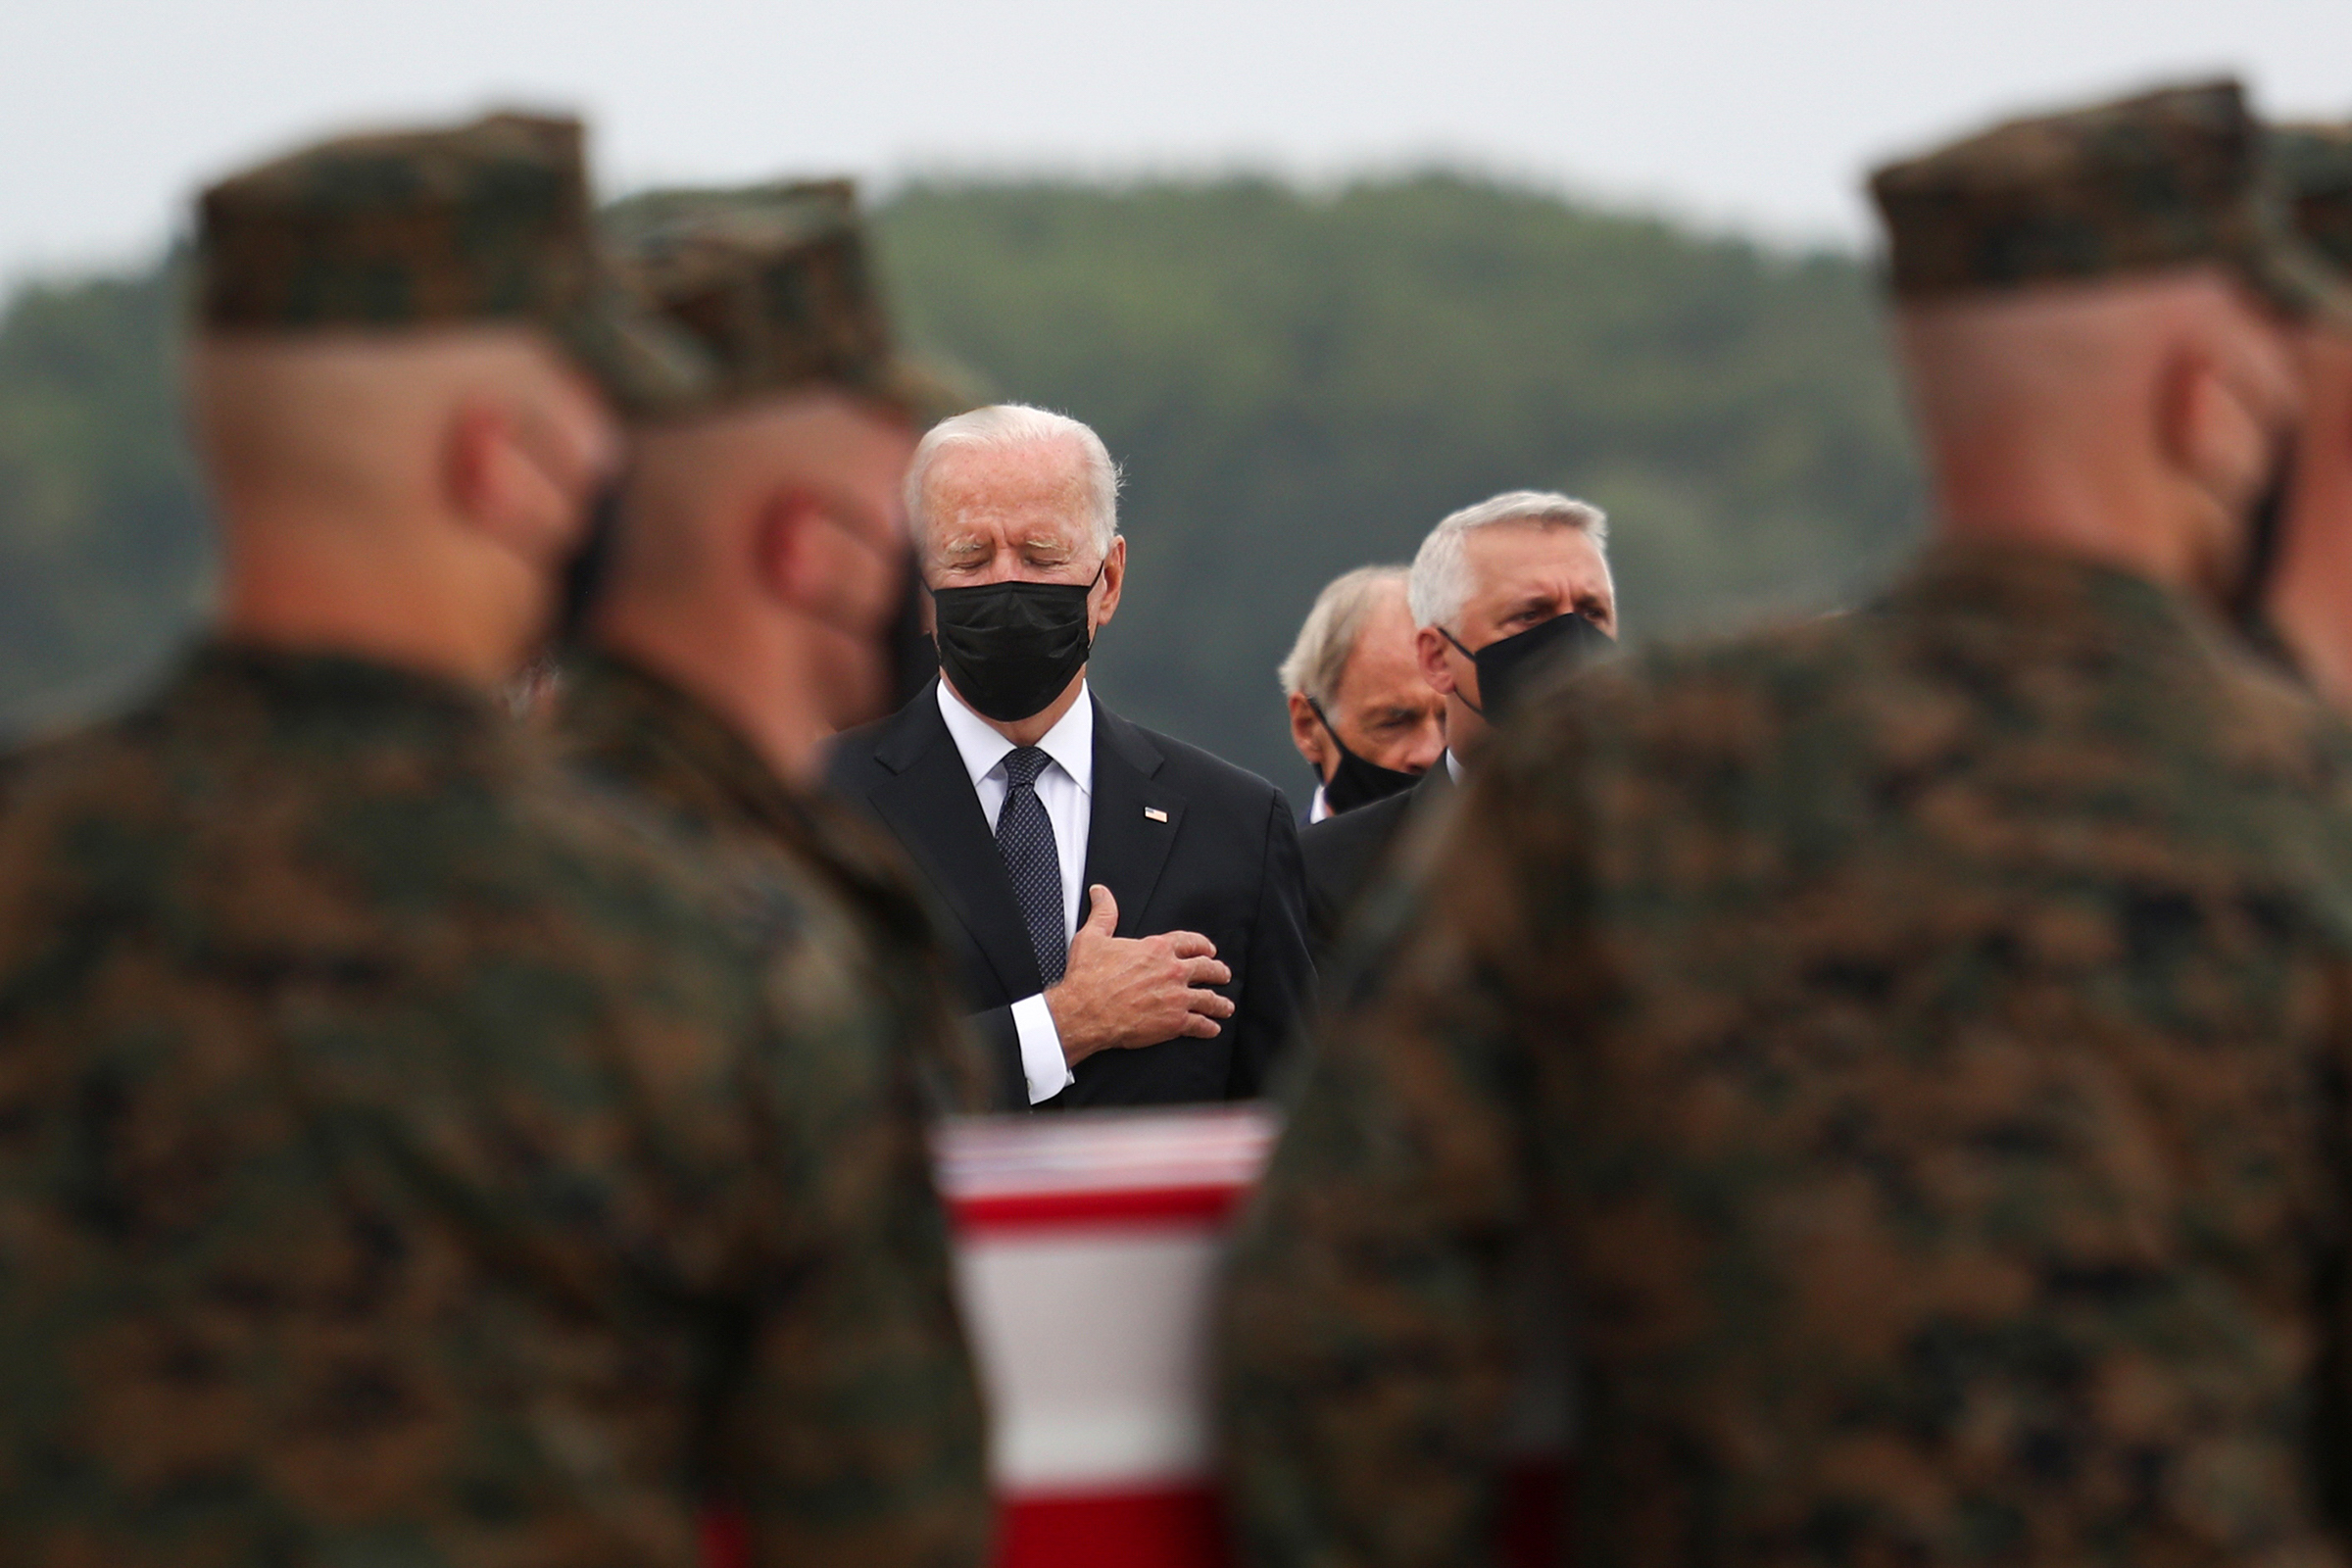 President Joe Biden during the dignified transfer of the remains of American service members, who were killed in a suicide bombing days earlier in Kabul, at Dover Air Force Base in Delaware on Aug. 29.